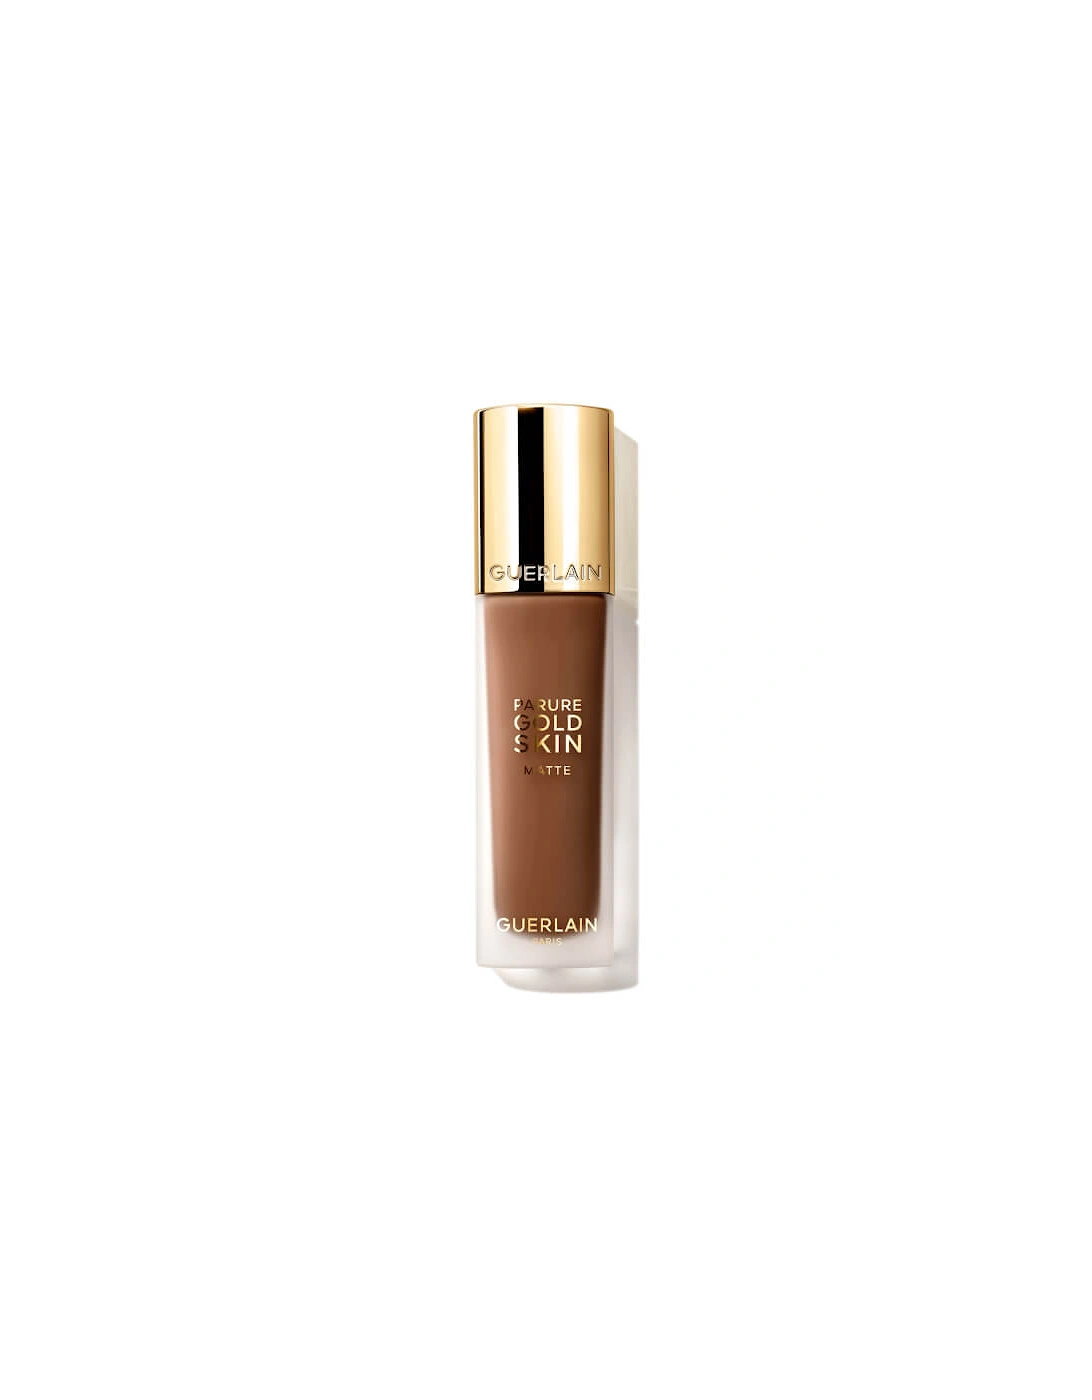 Parure Gold Skin 24H No-Transfer High Perfection Foundation - 7N Neutral / Neutre, 2 of 1